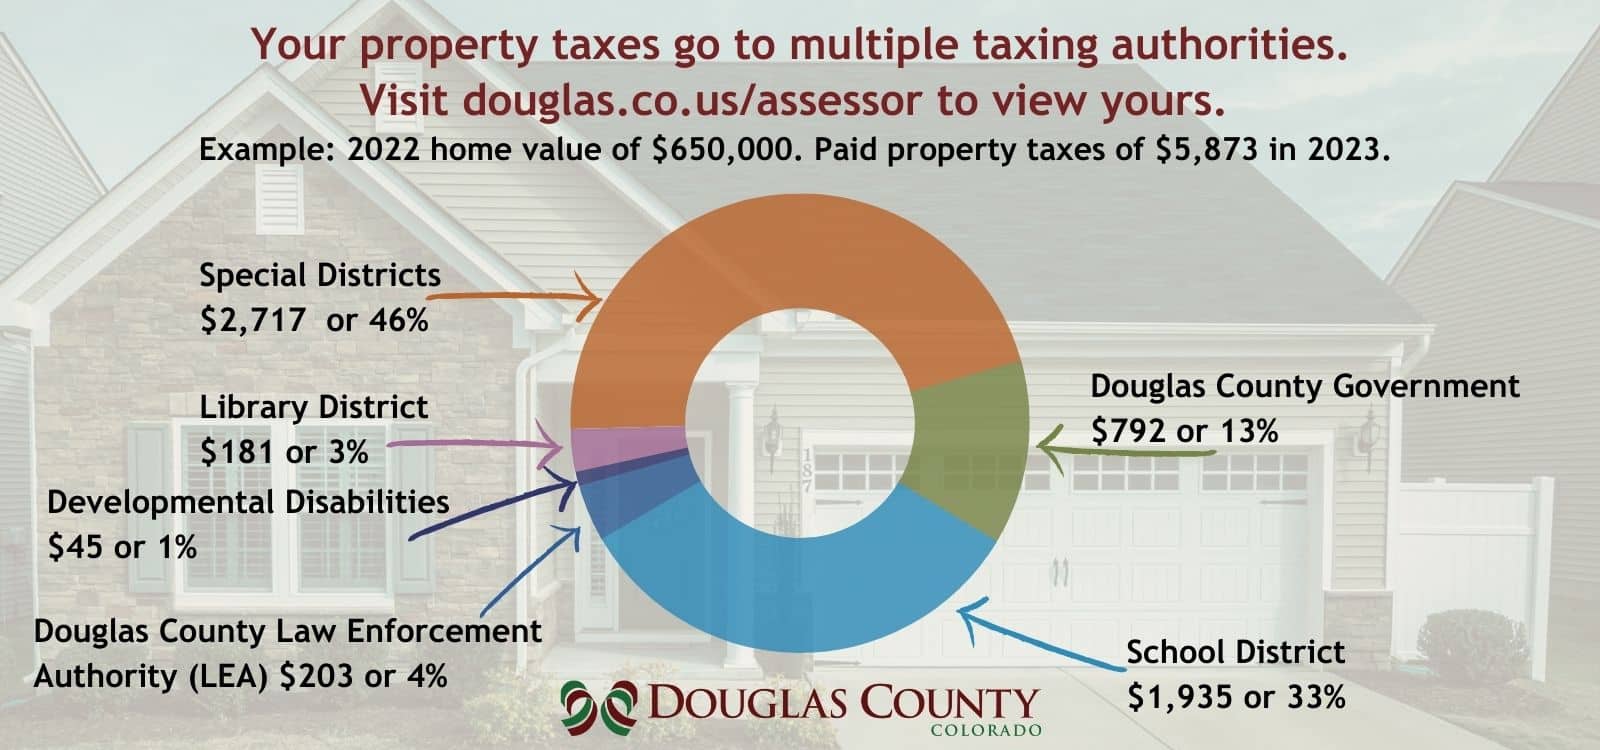 Own property in Douglas County? Notice of Valuations available now